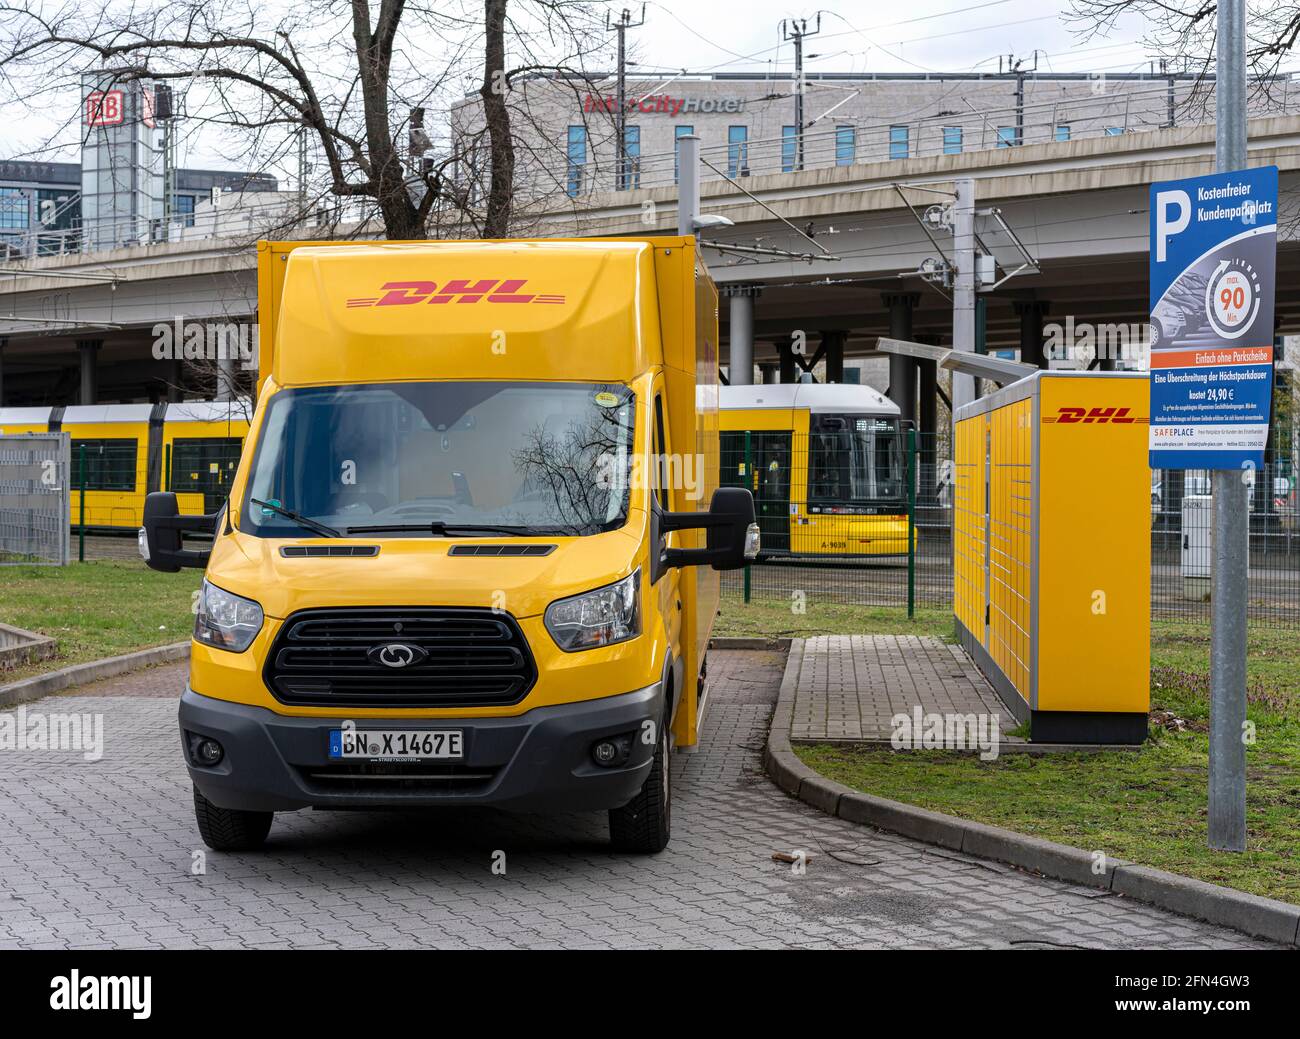 Deutsche Post Vehicle At A DHL Packstation Stock Photo - Alamy